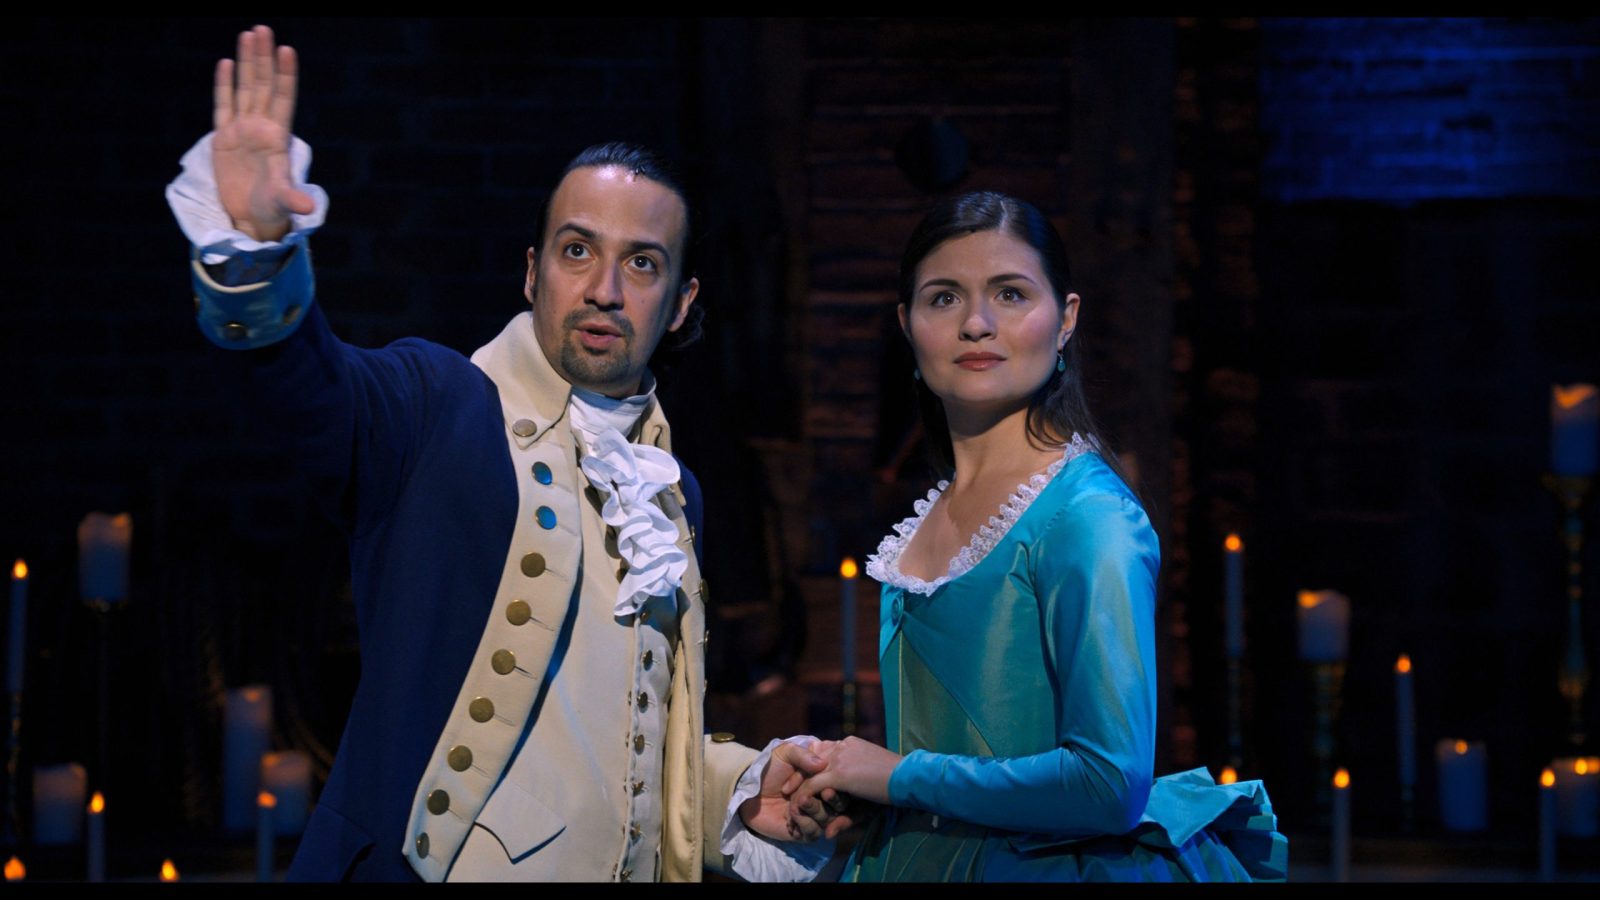 <p><em>Hamilton</em>, a a Broadway musical, came to film in 2020. It’s an incredible film, and it tells the story of Alexander Hamilton and his role in the Revolutionary War and the founding of America. It’s filled with the ideas that Hamilton himself championed, and his relationships with the other Founding Fathers. There’s a lot to discuss in this film, and we suspect you’re going to enjoy learning American history with the help of great music!</p>